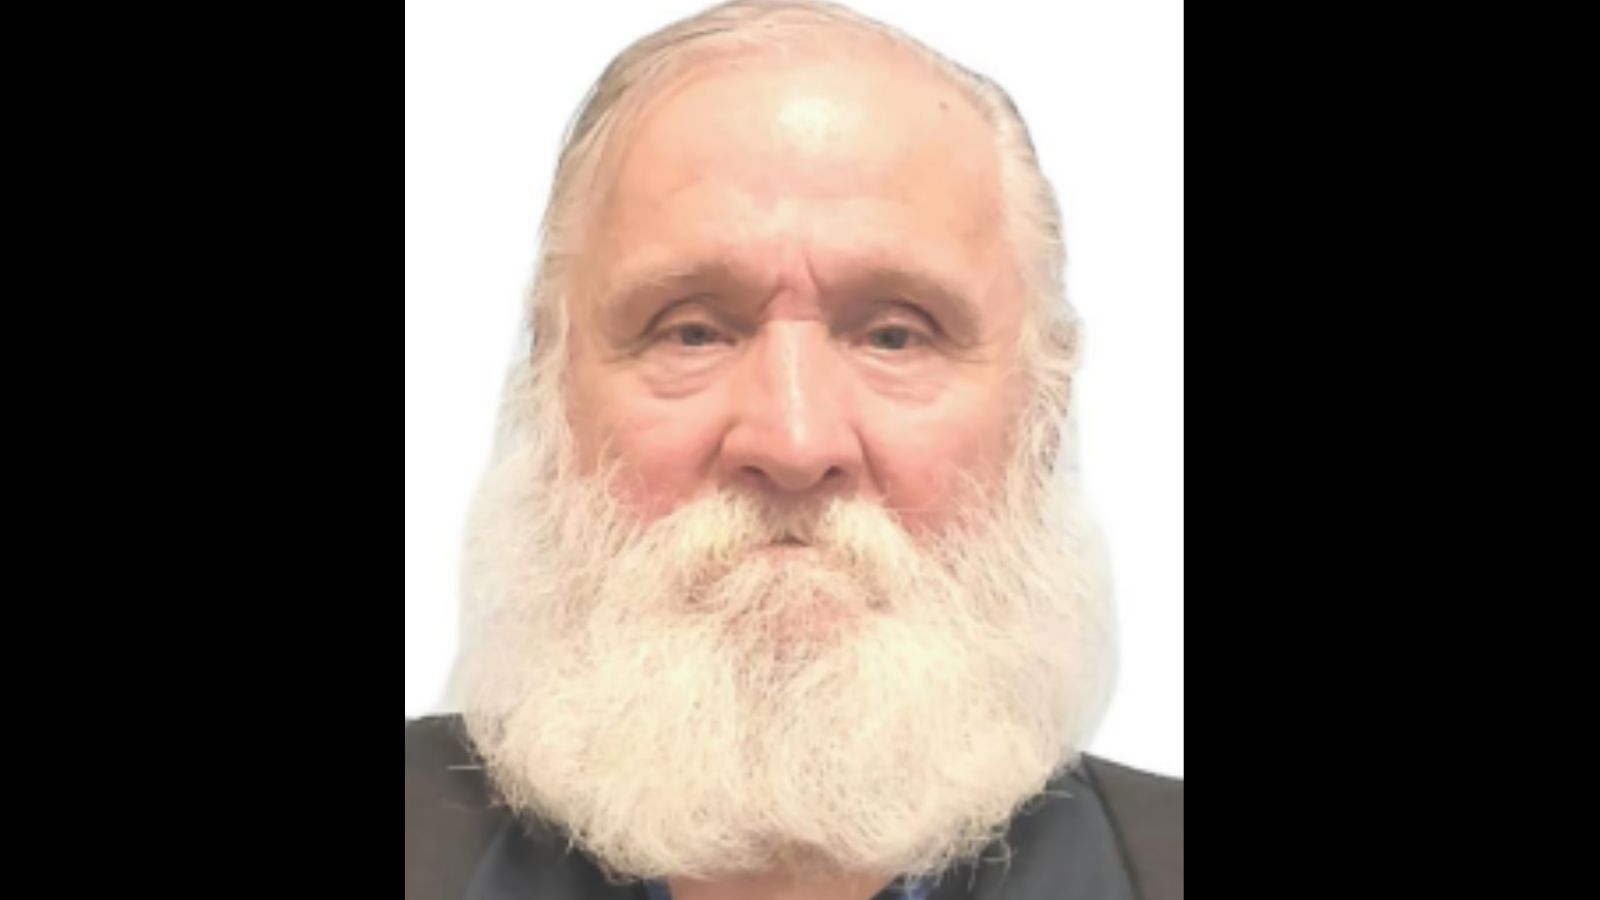 Silver Alert issued for 74-year-old man last seen in Phoenix...